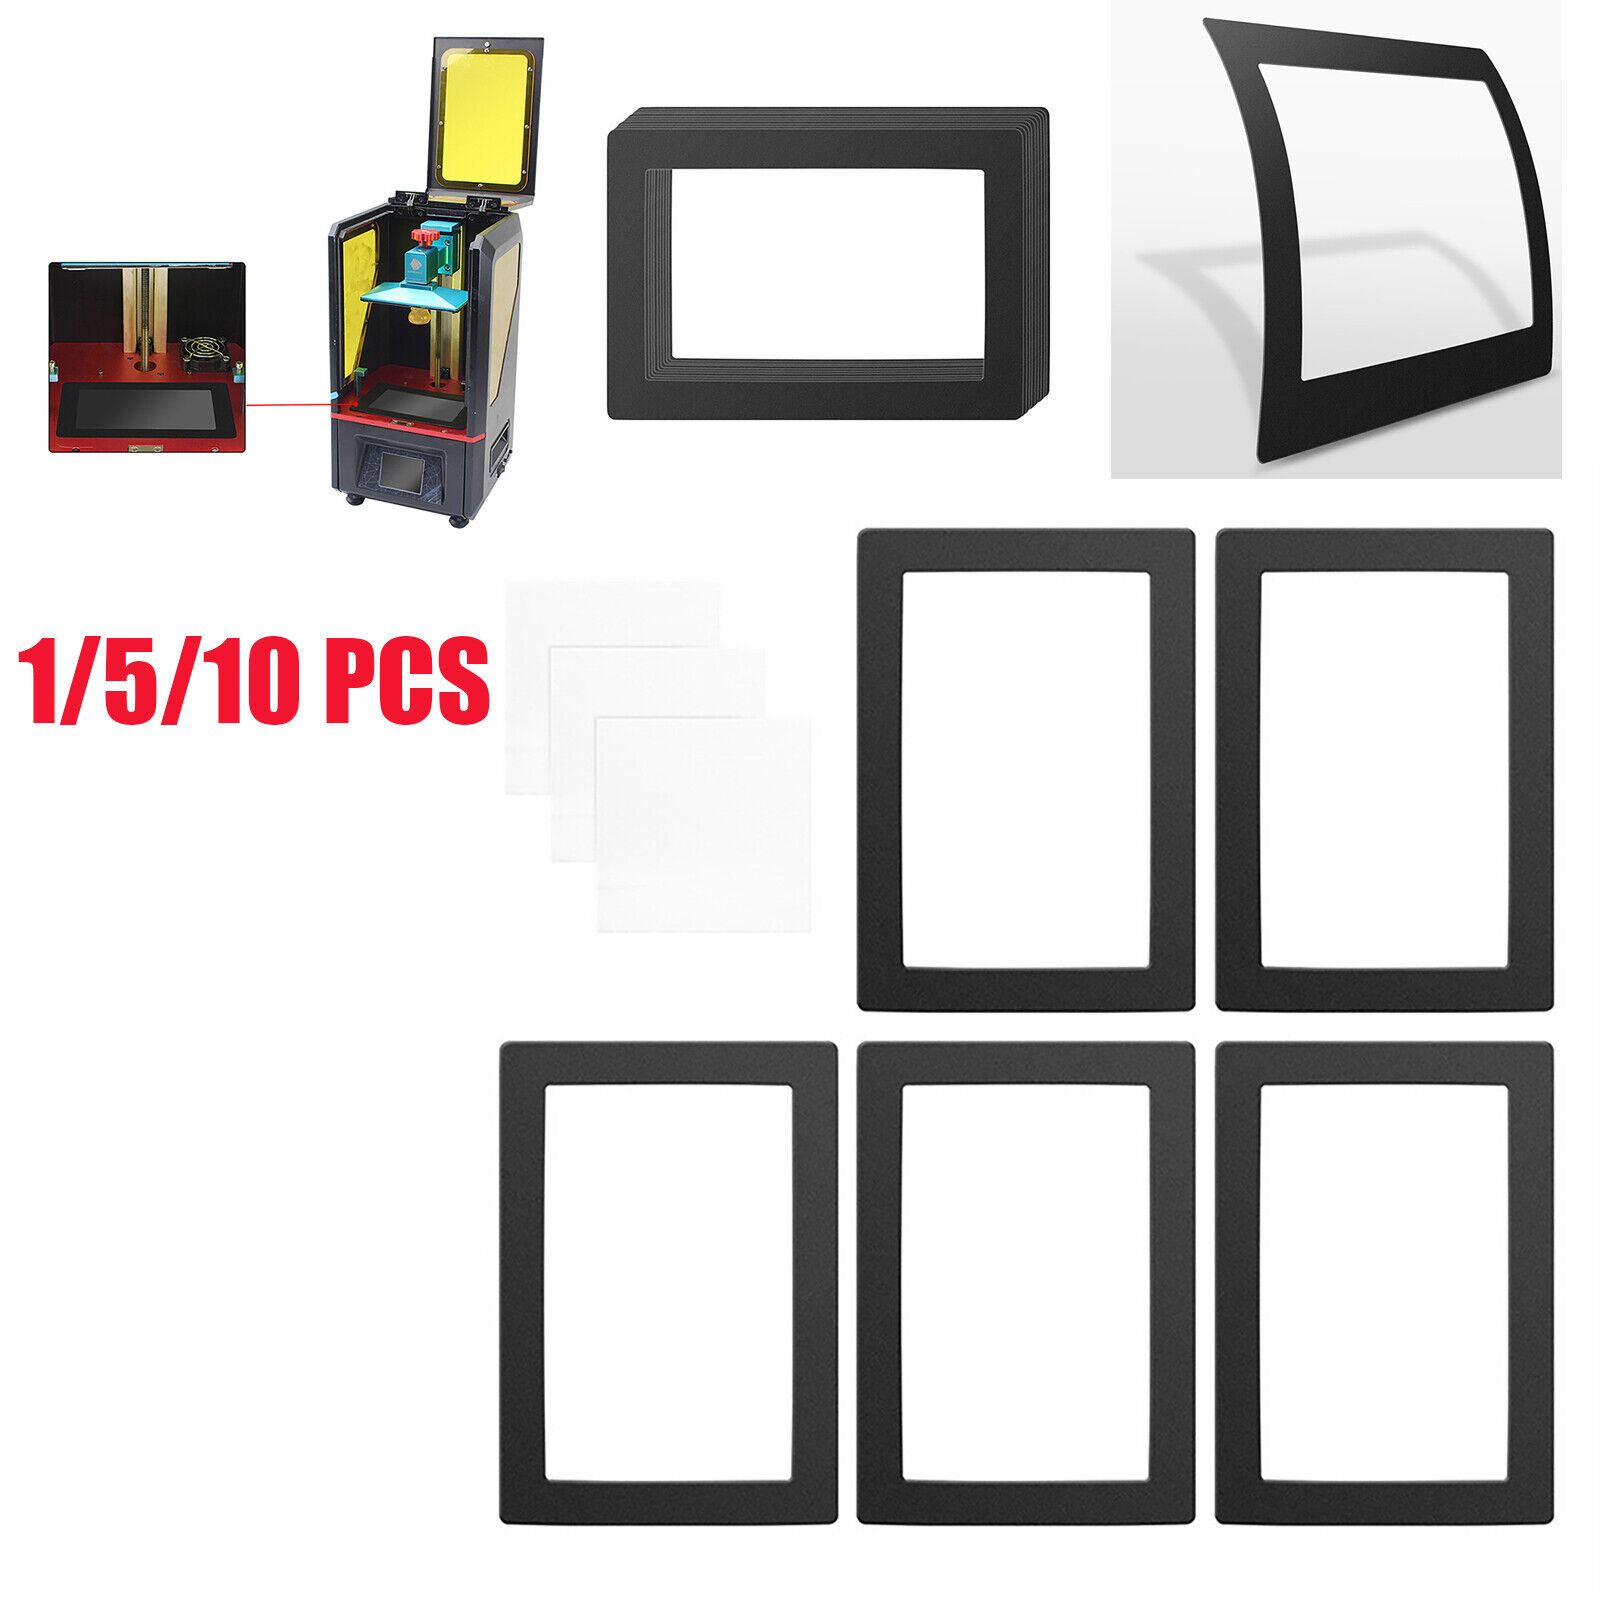 241x171mm FEP Film Protective Cover Dust-proof For ANYCUBIC Photon S 3D Printer